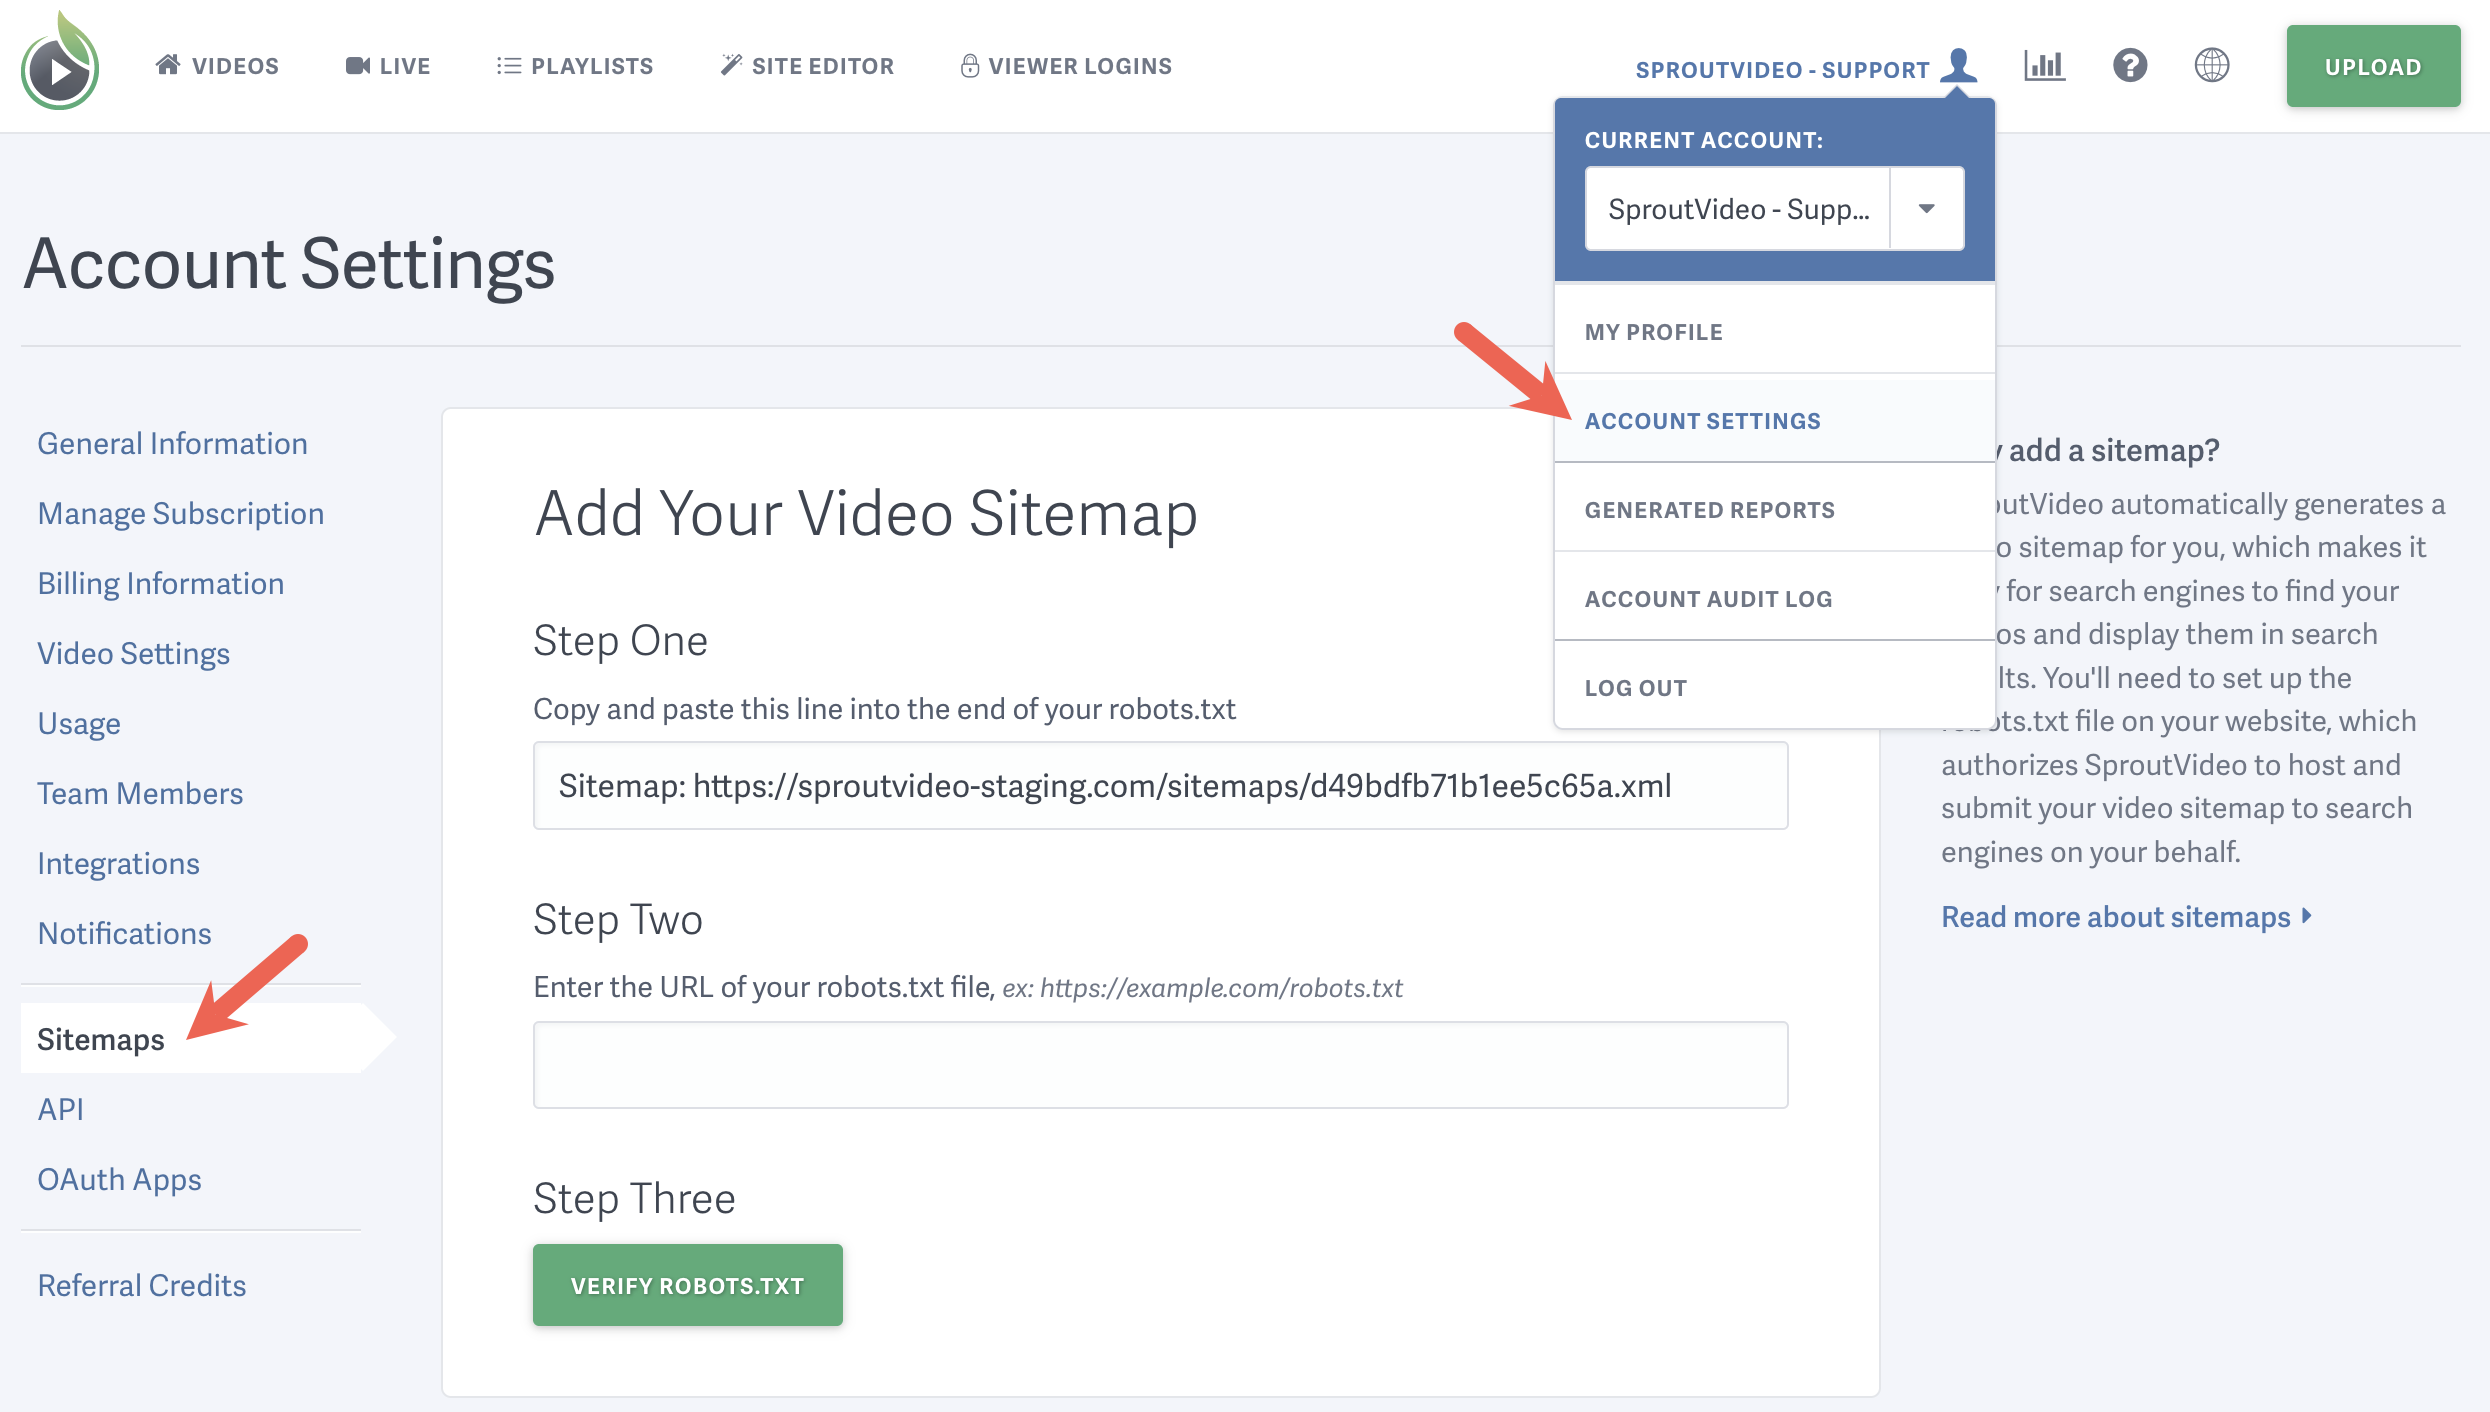 Sitemap settings in your SproutVideo video hosting account